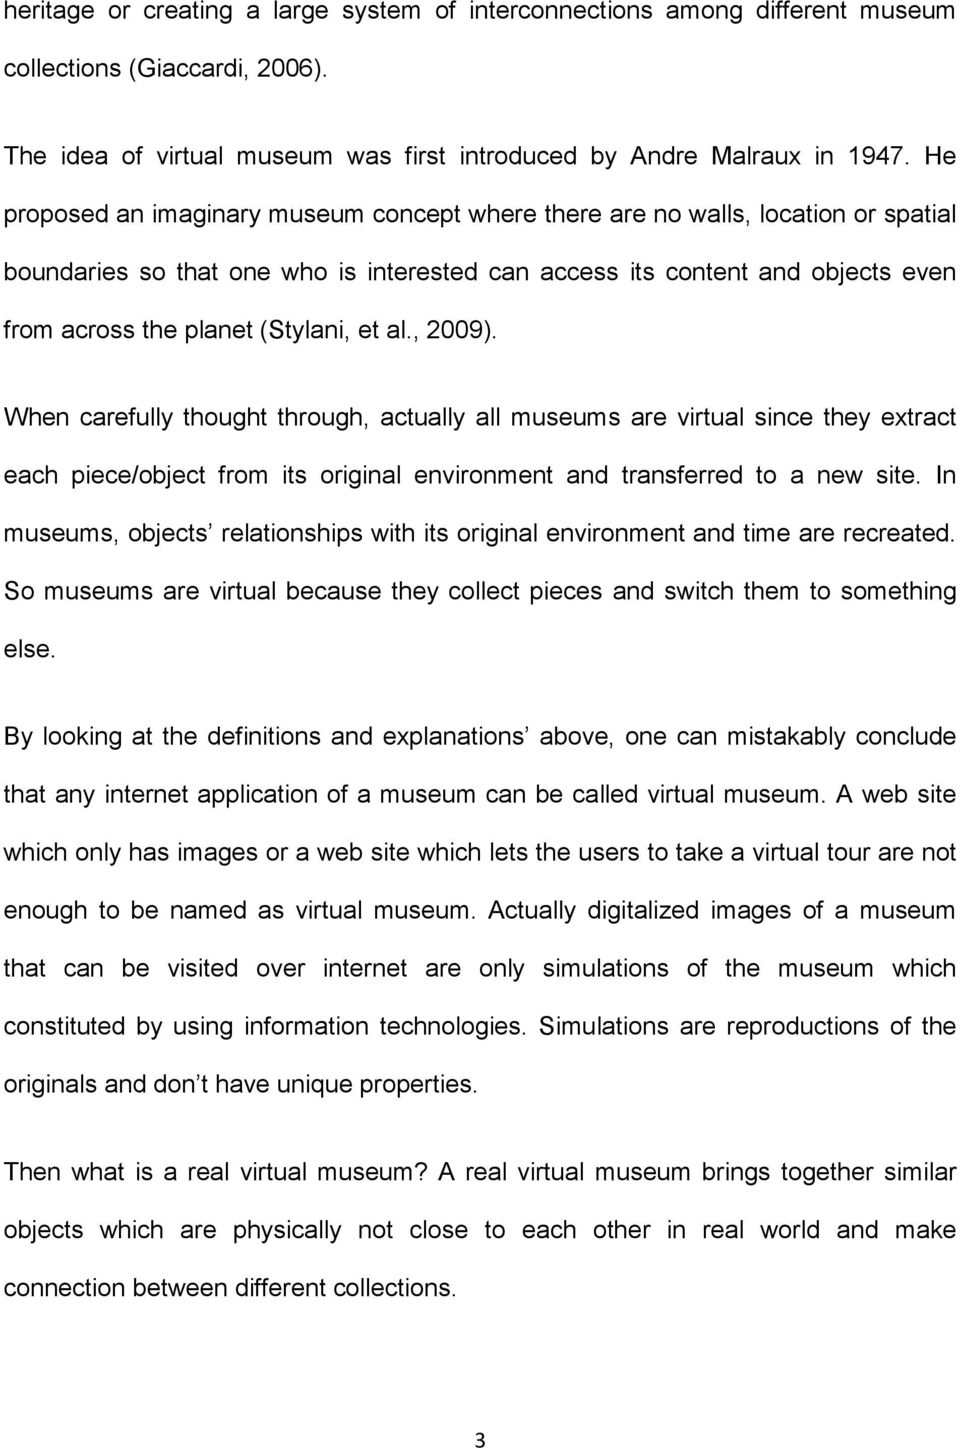 et al., 2009). When carefully thought through, actually all museums are virtual since they extract each piece/object from its original environment and transferred to a new site.